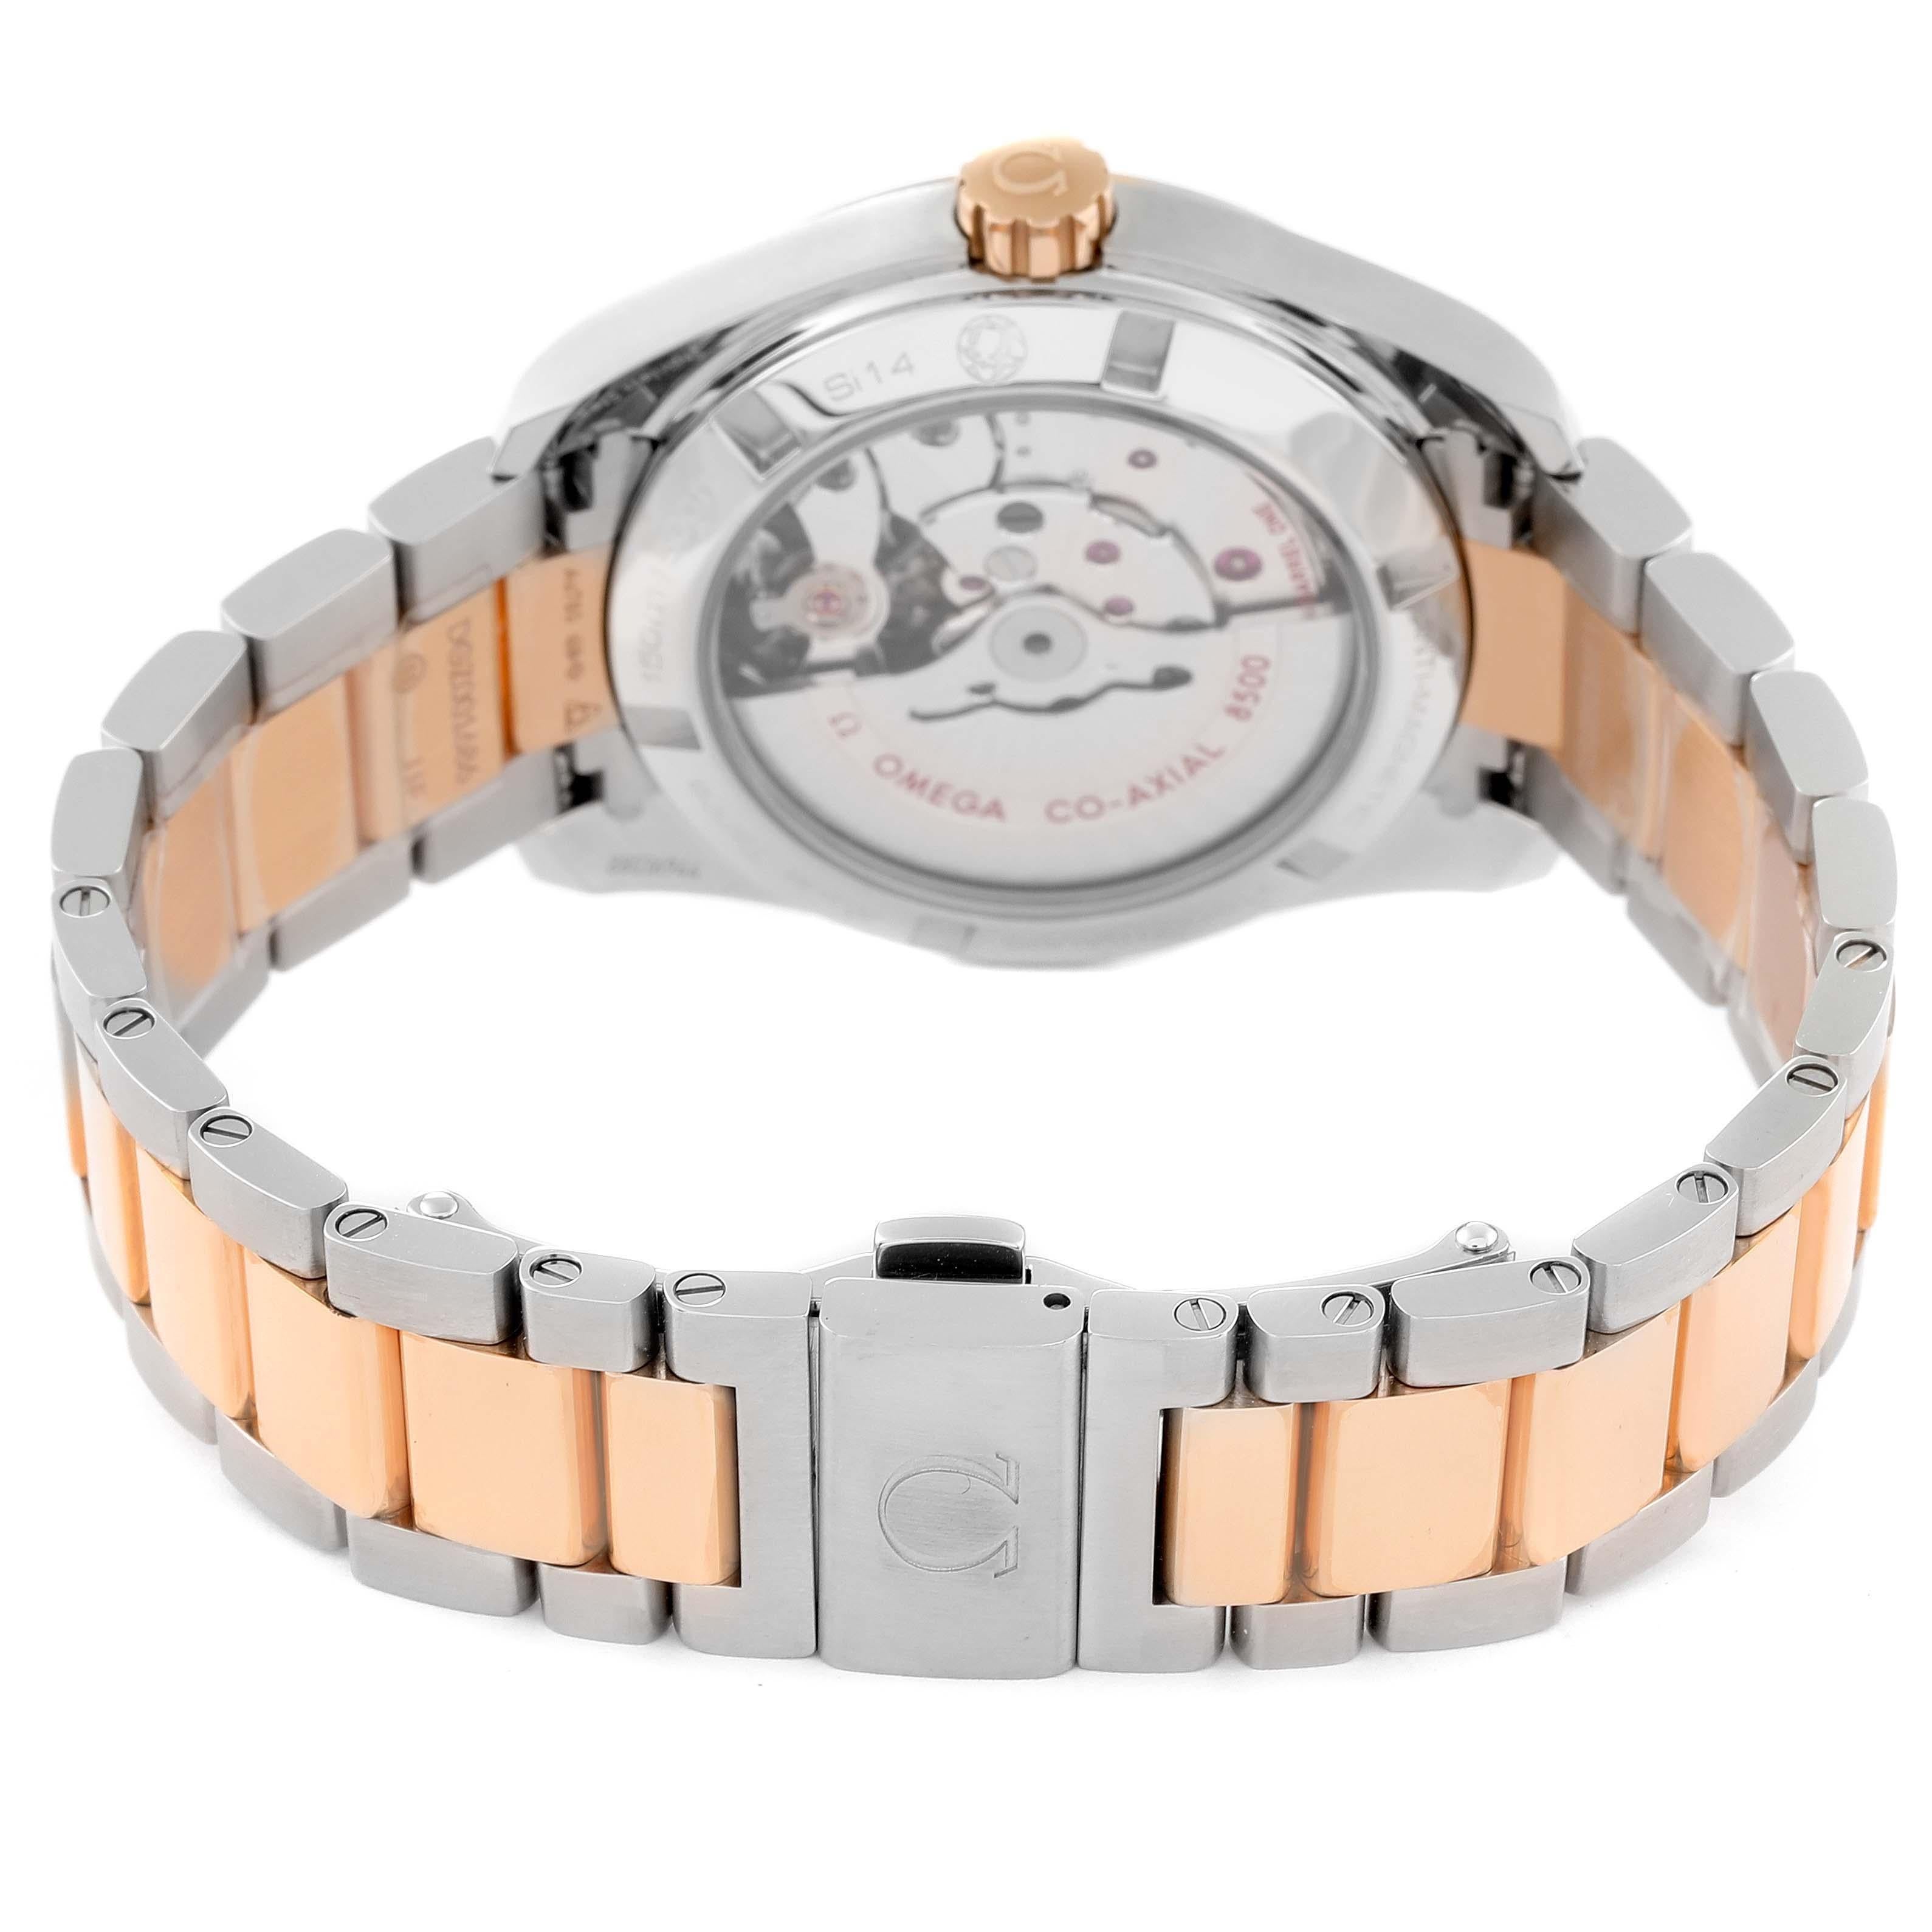 Omega Aqua Terra Rose Gold Mother of Pearl Diamond Ladies Watch For Sale 3